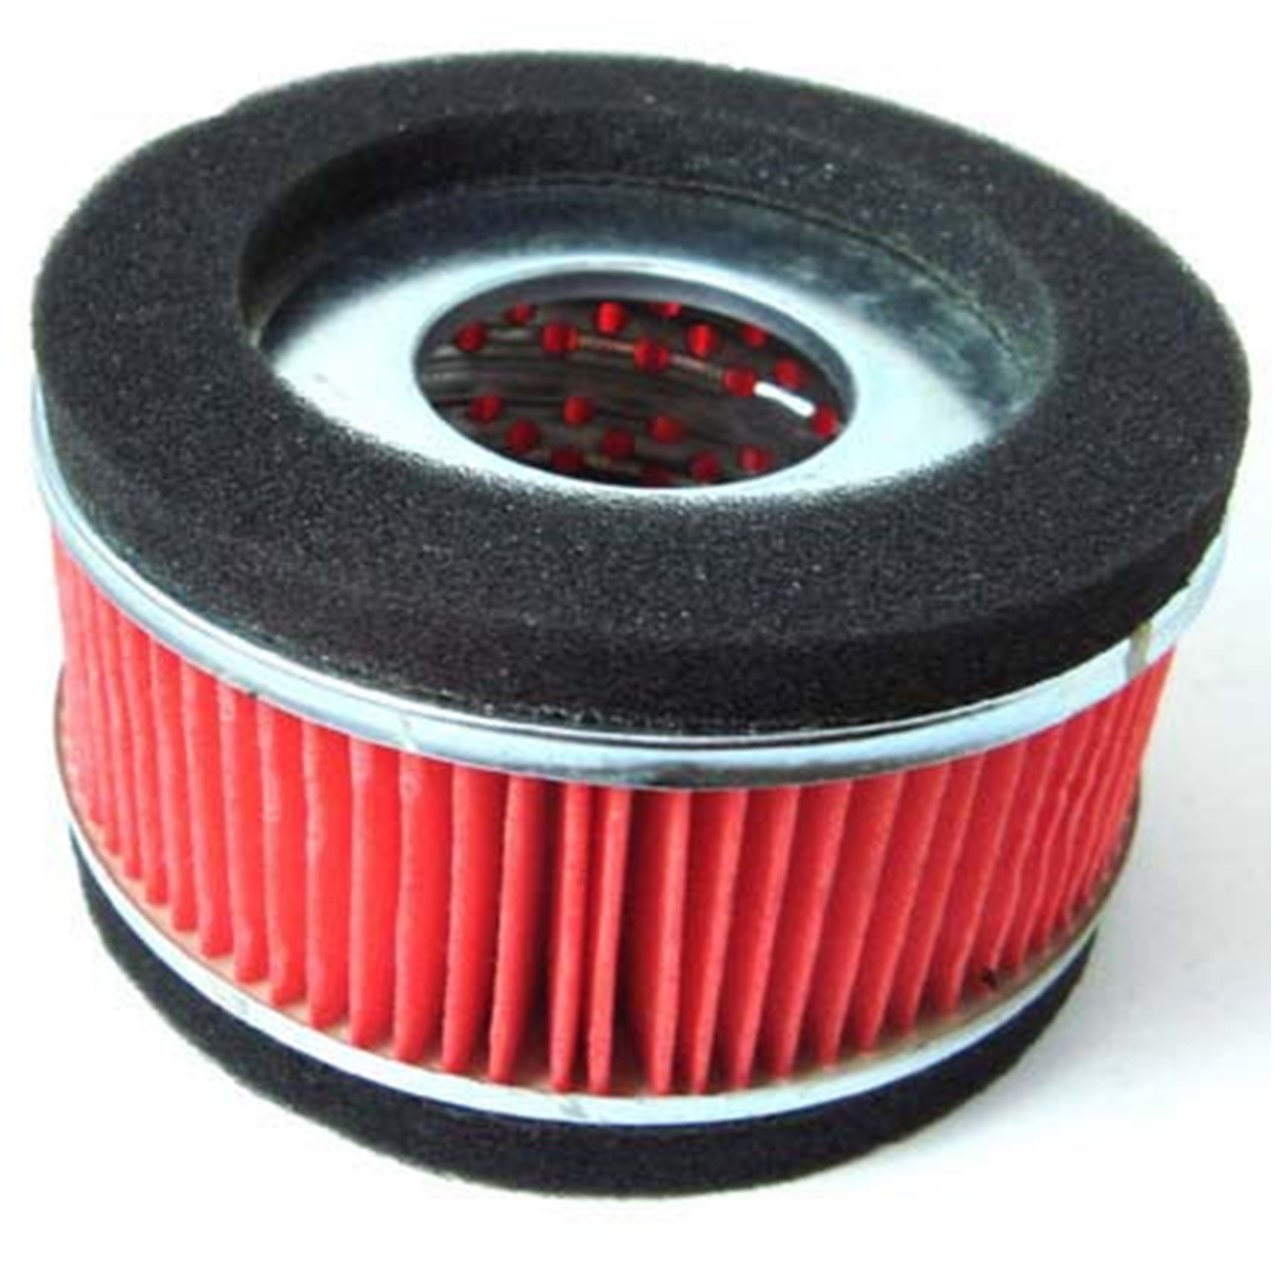 Air Filter Element 4 Stroke GY6-125, GY6-150cc ID=43mm, OD=120mm, H=65mm